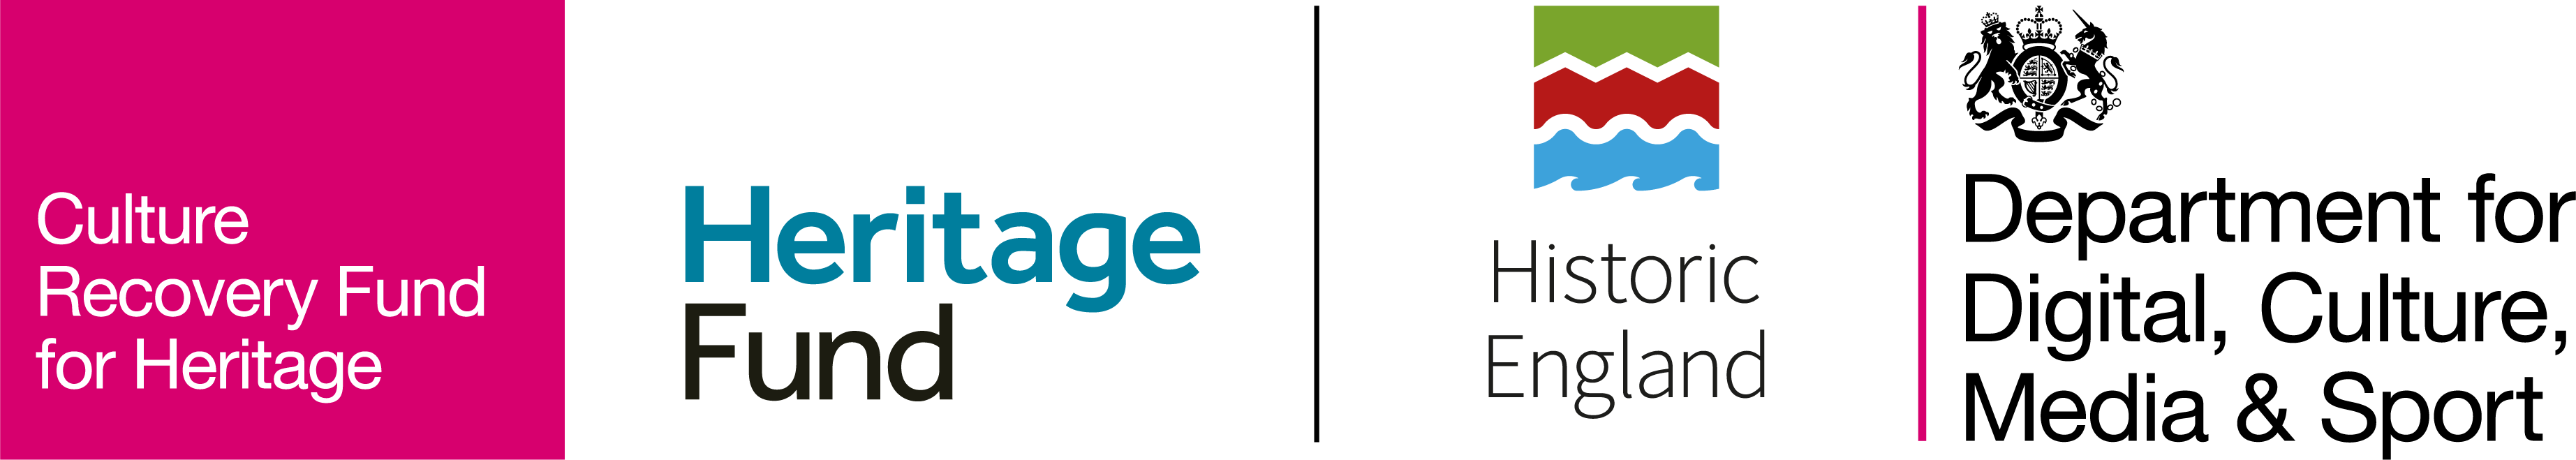 Culture Recovery Fund for Heritage logo